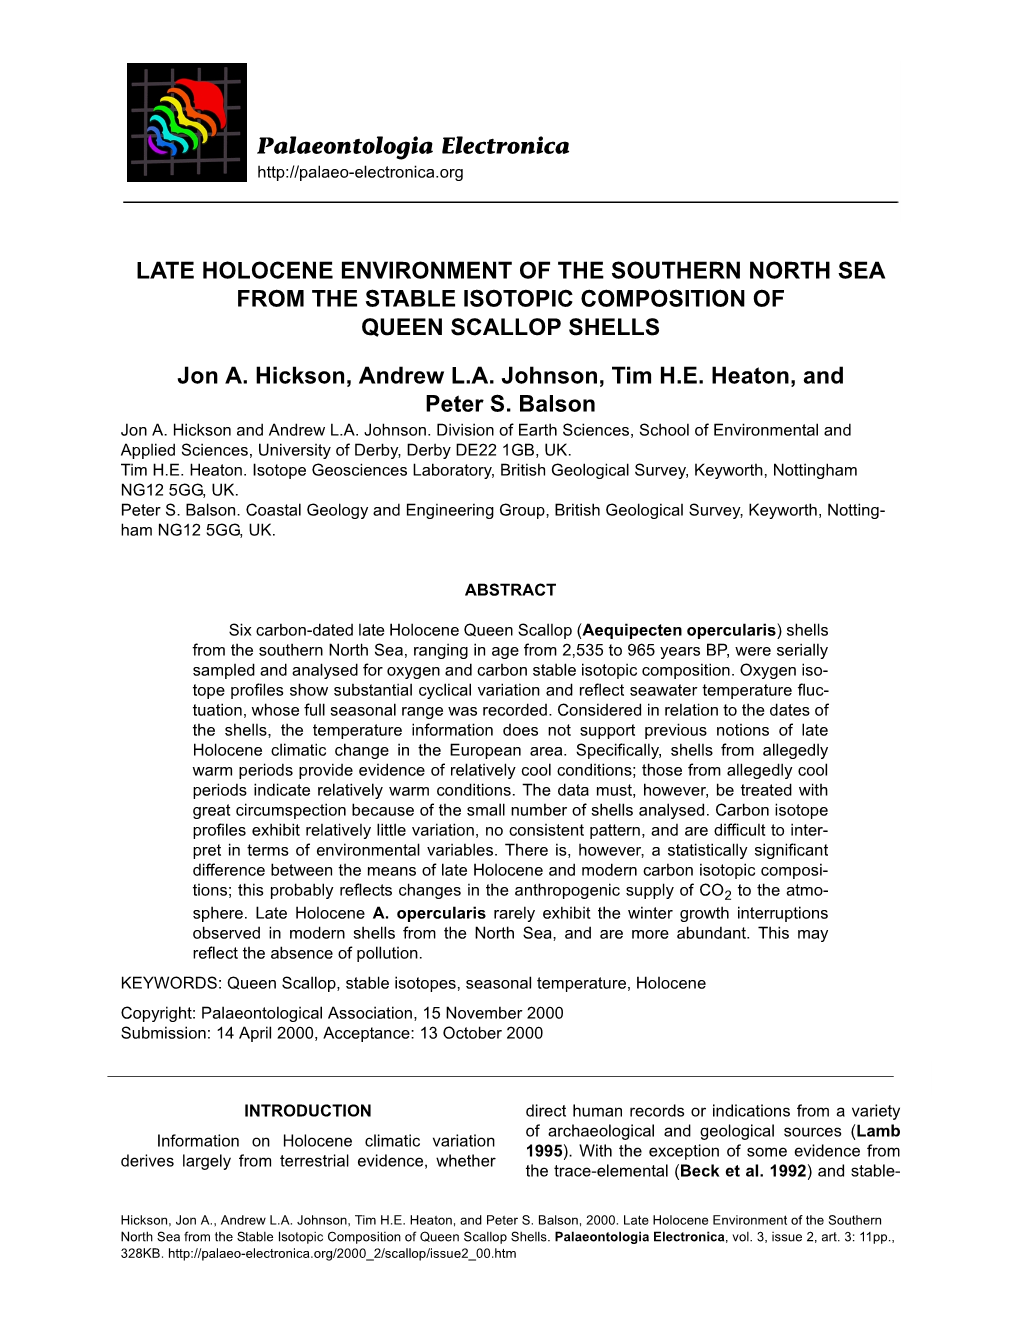 Late Holocene Environment of the Southern North Sea from the Stable Isotopic Composition of Queen Scallop Shells